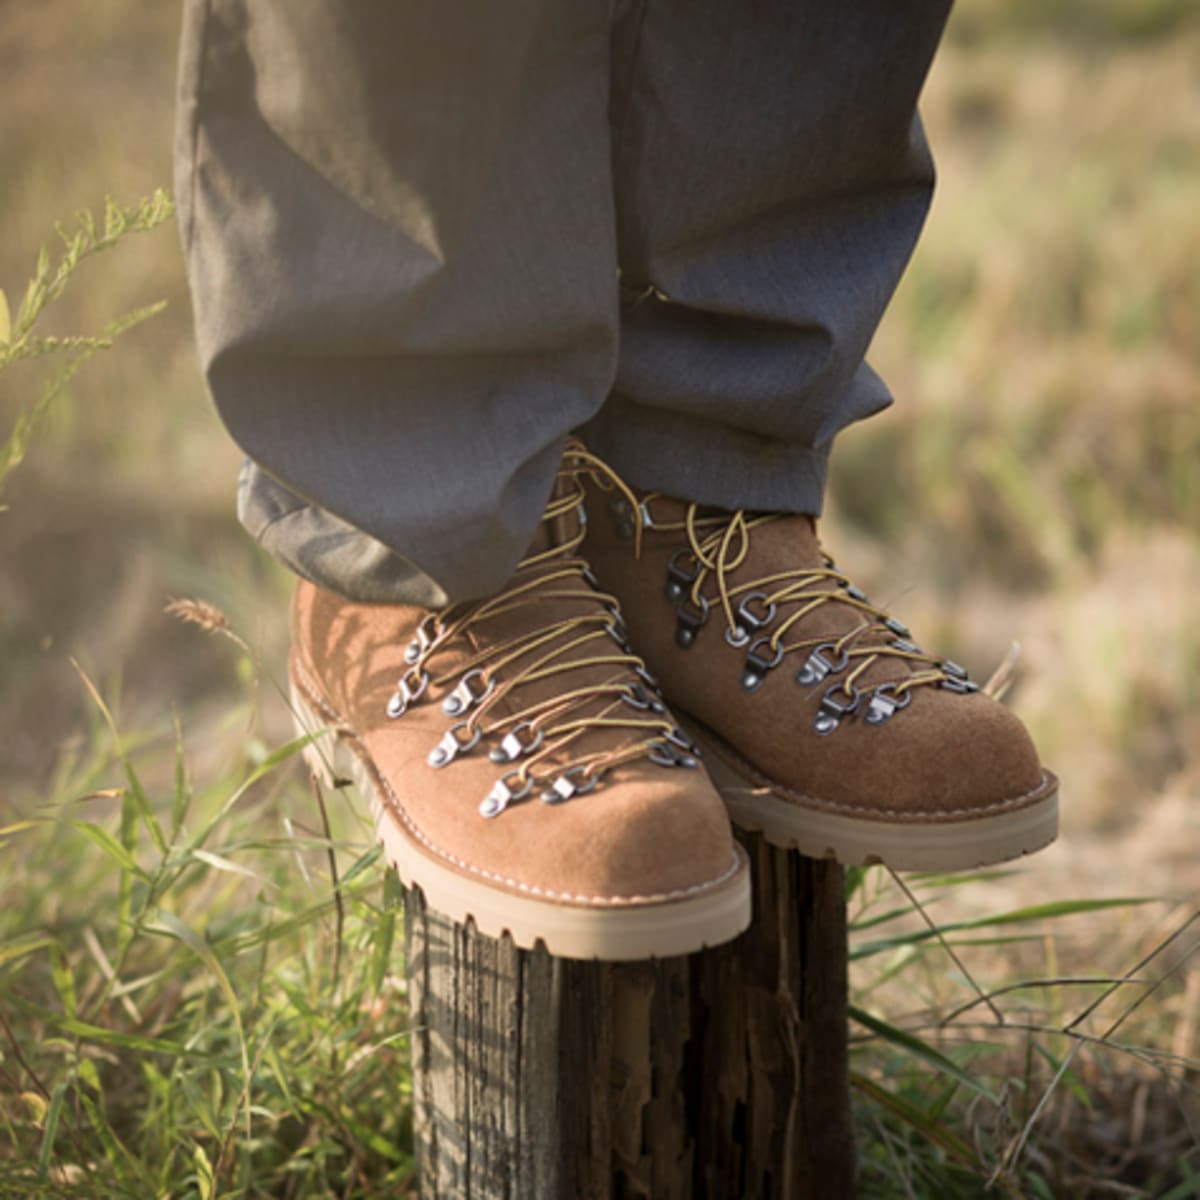 Danner releases a special edition Mountain Trail with Engineered